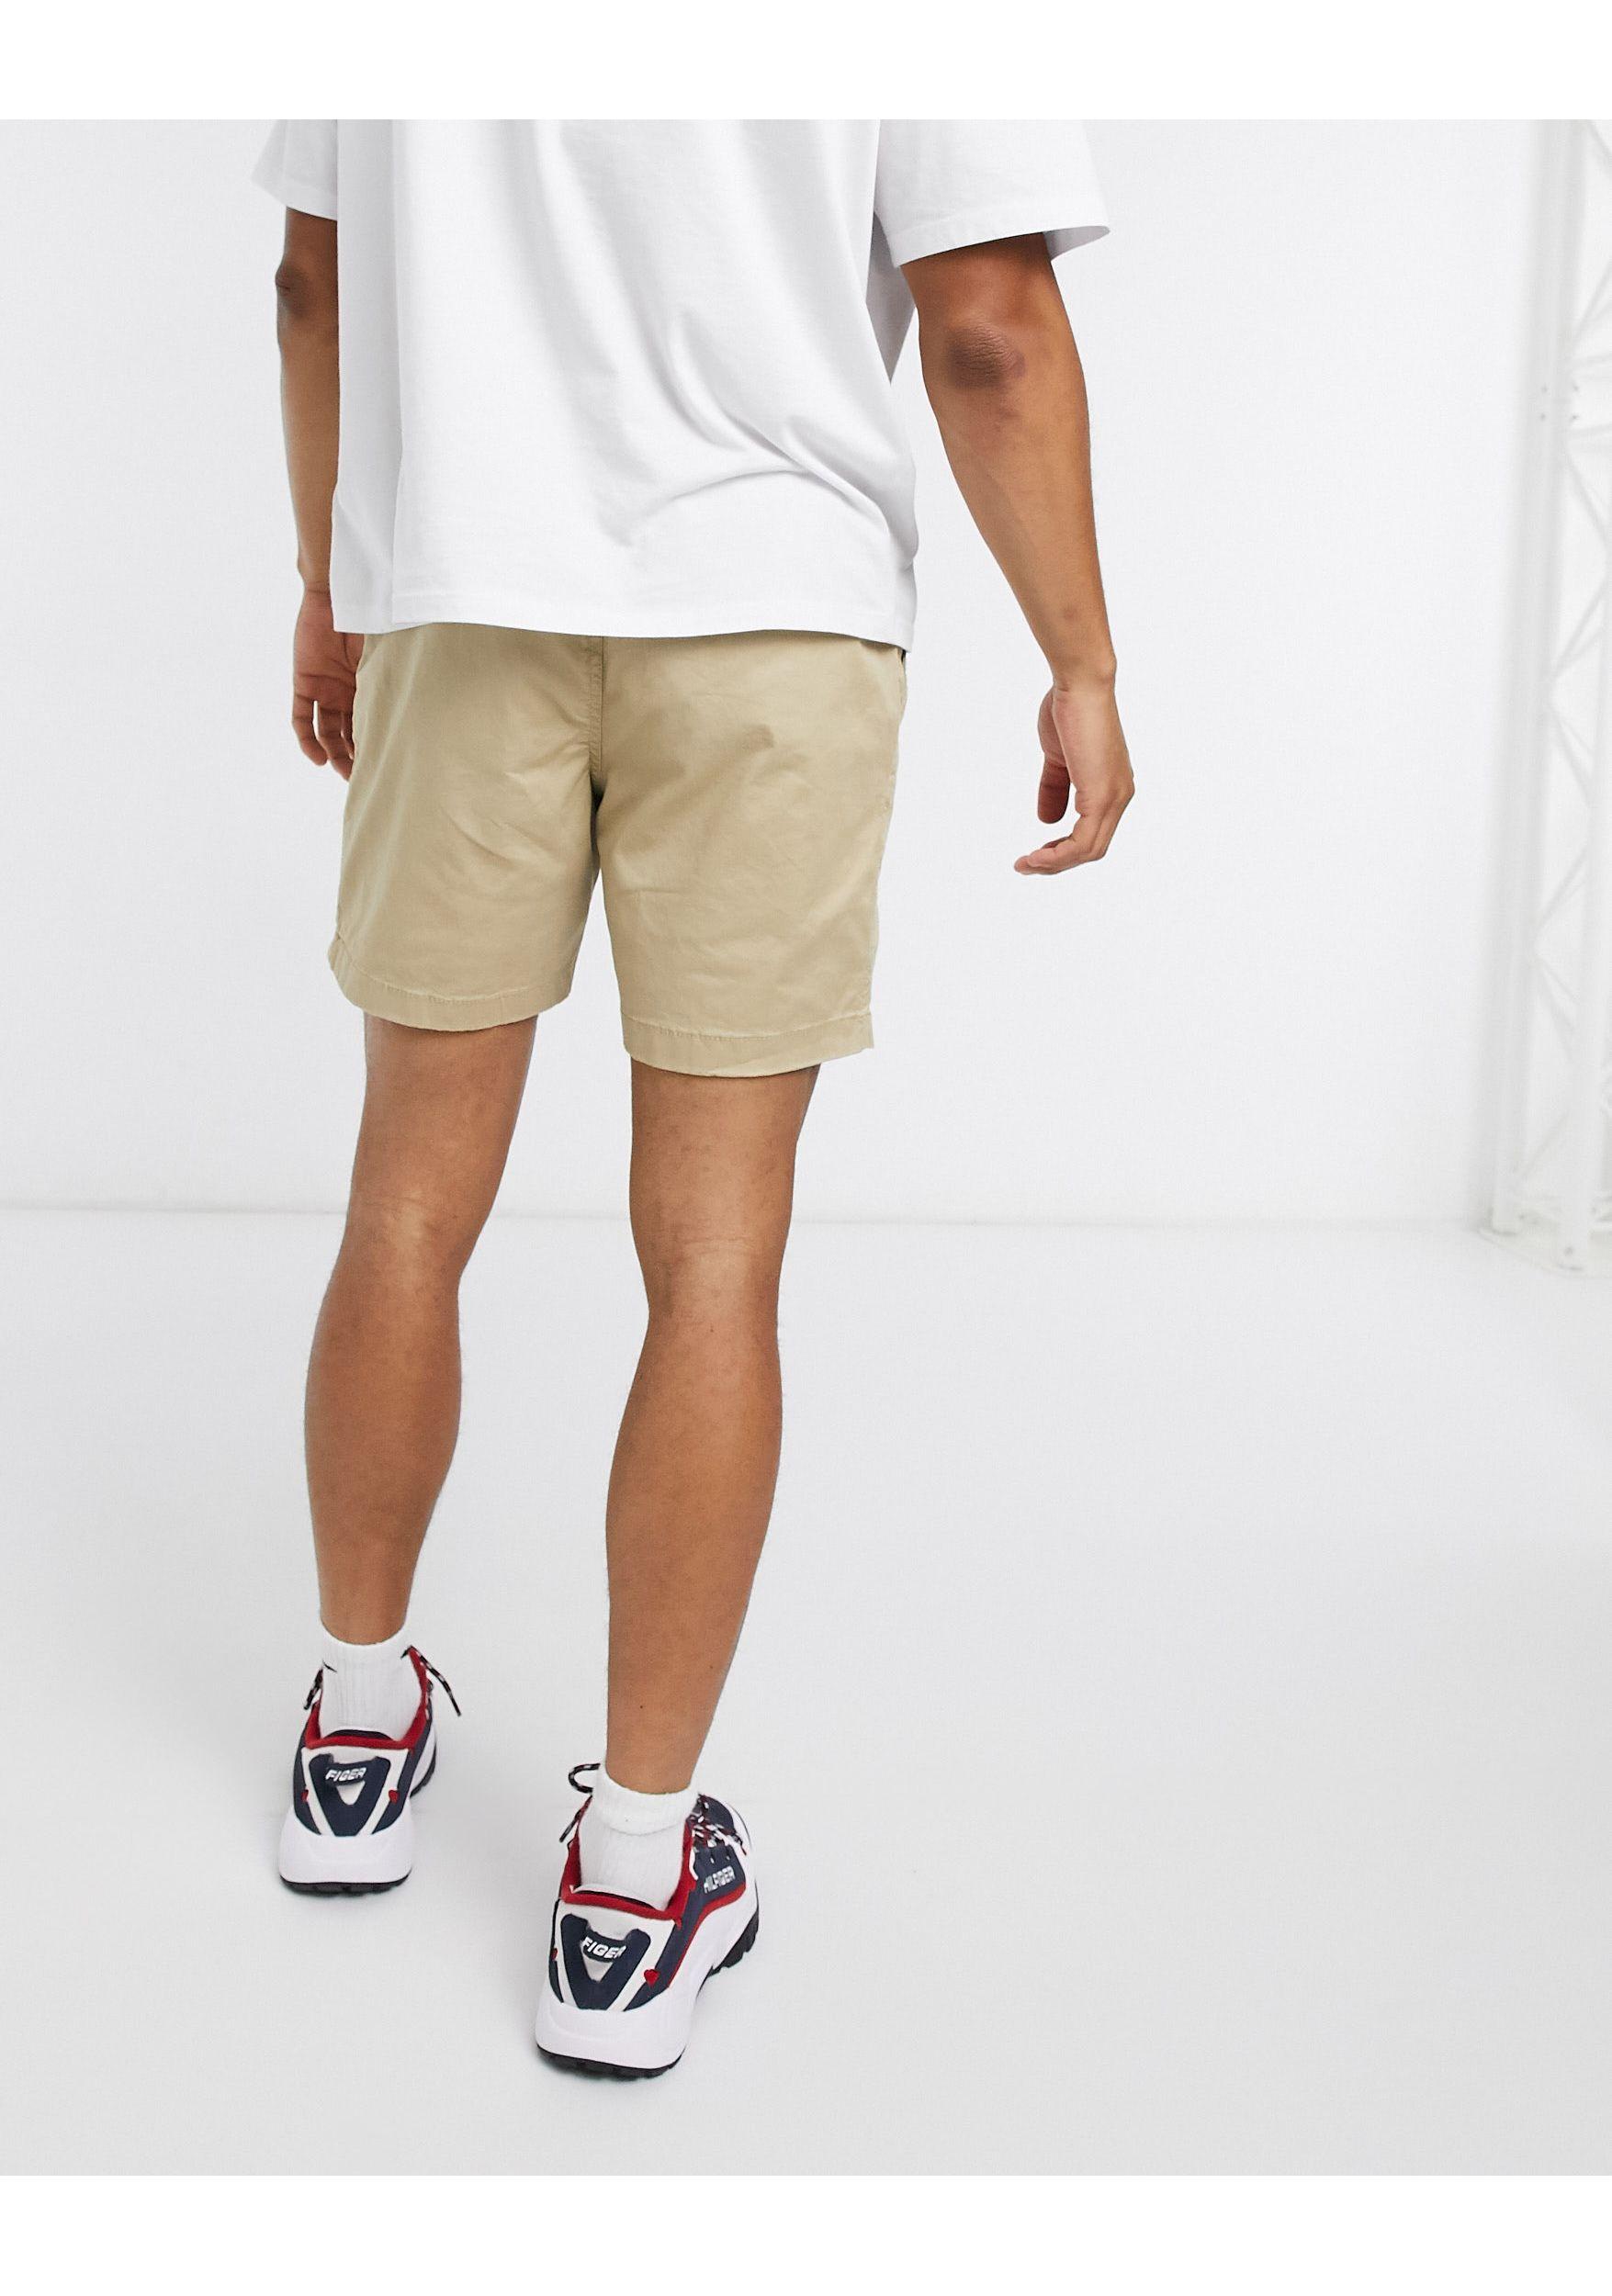 Tommy Hilfiger Theo 7 Shorts in Natural for Lyst